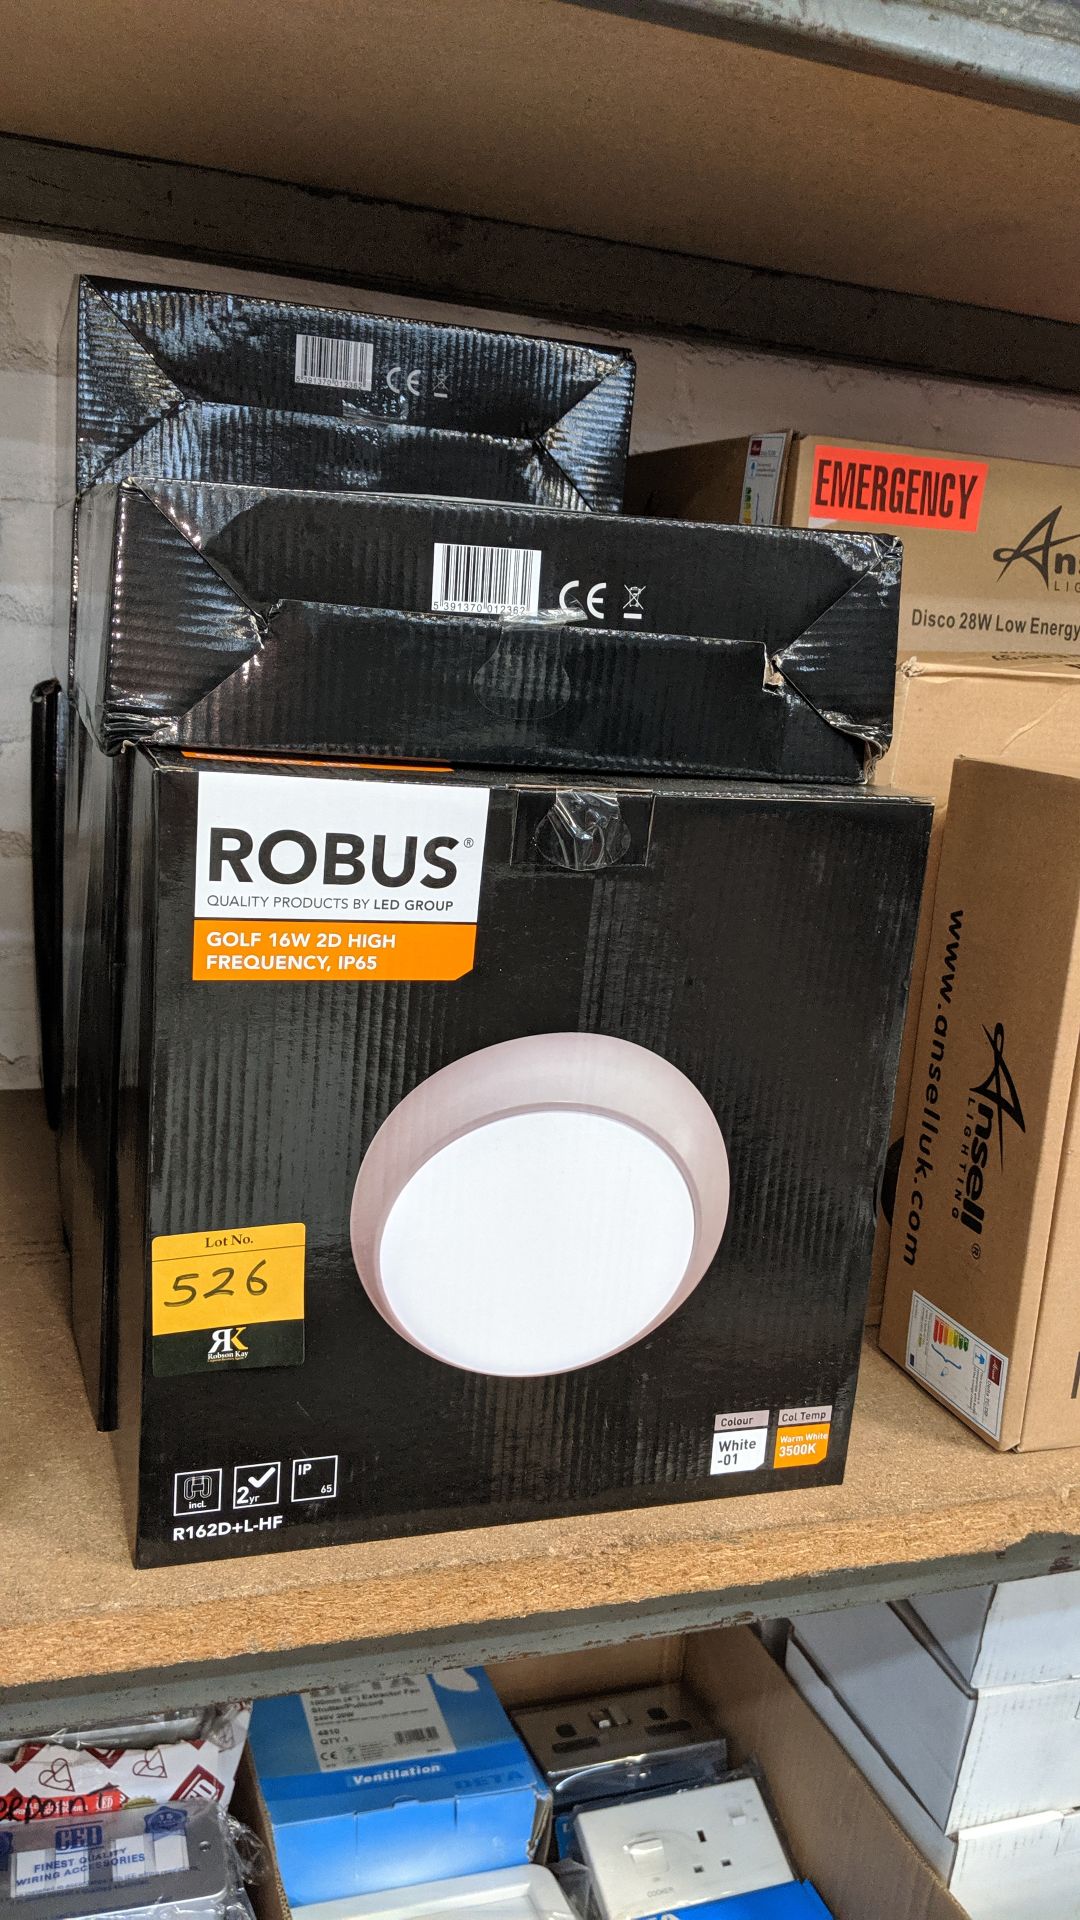 9 off Robus golf 16w 2D high frequency IP65 lamps. This is one of a number of lots being sold on